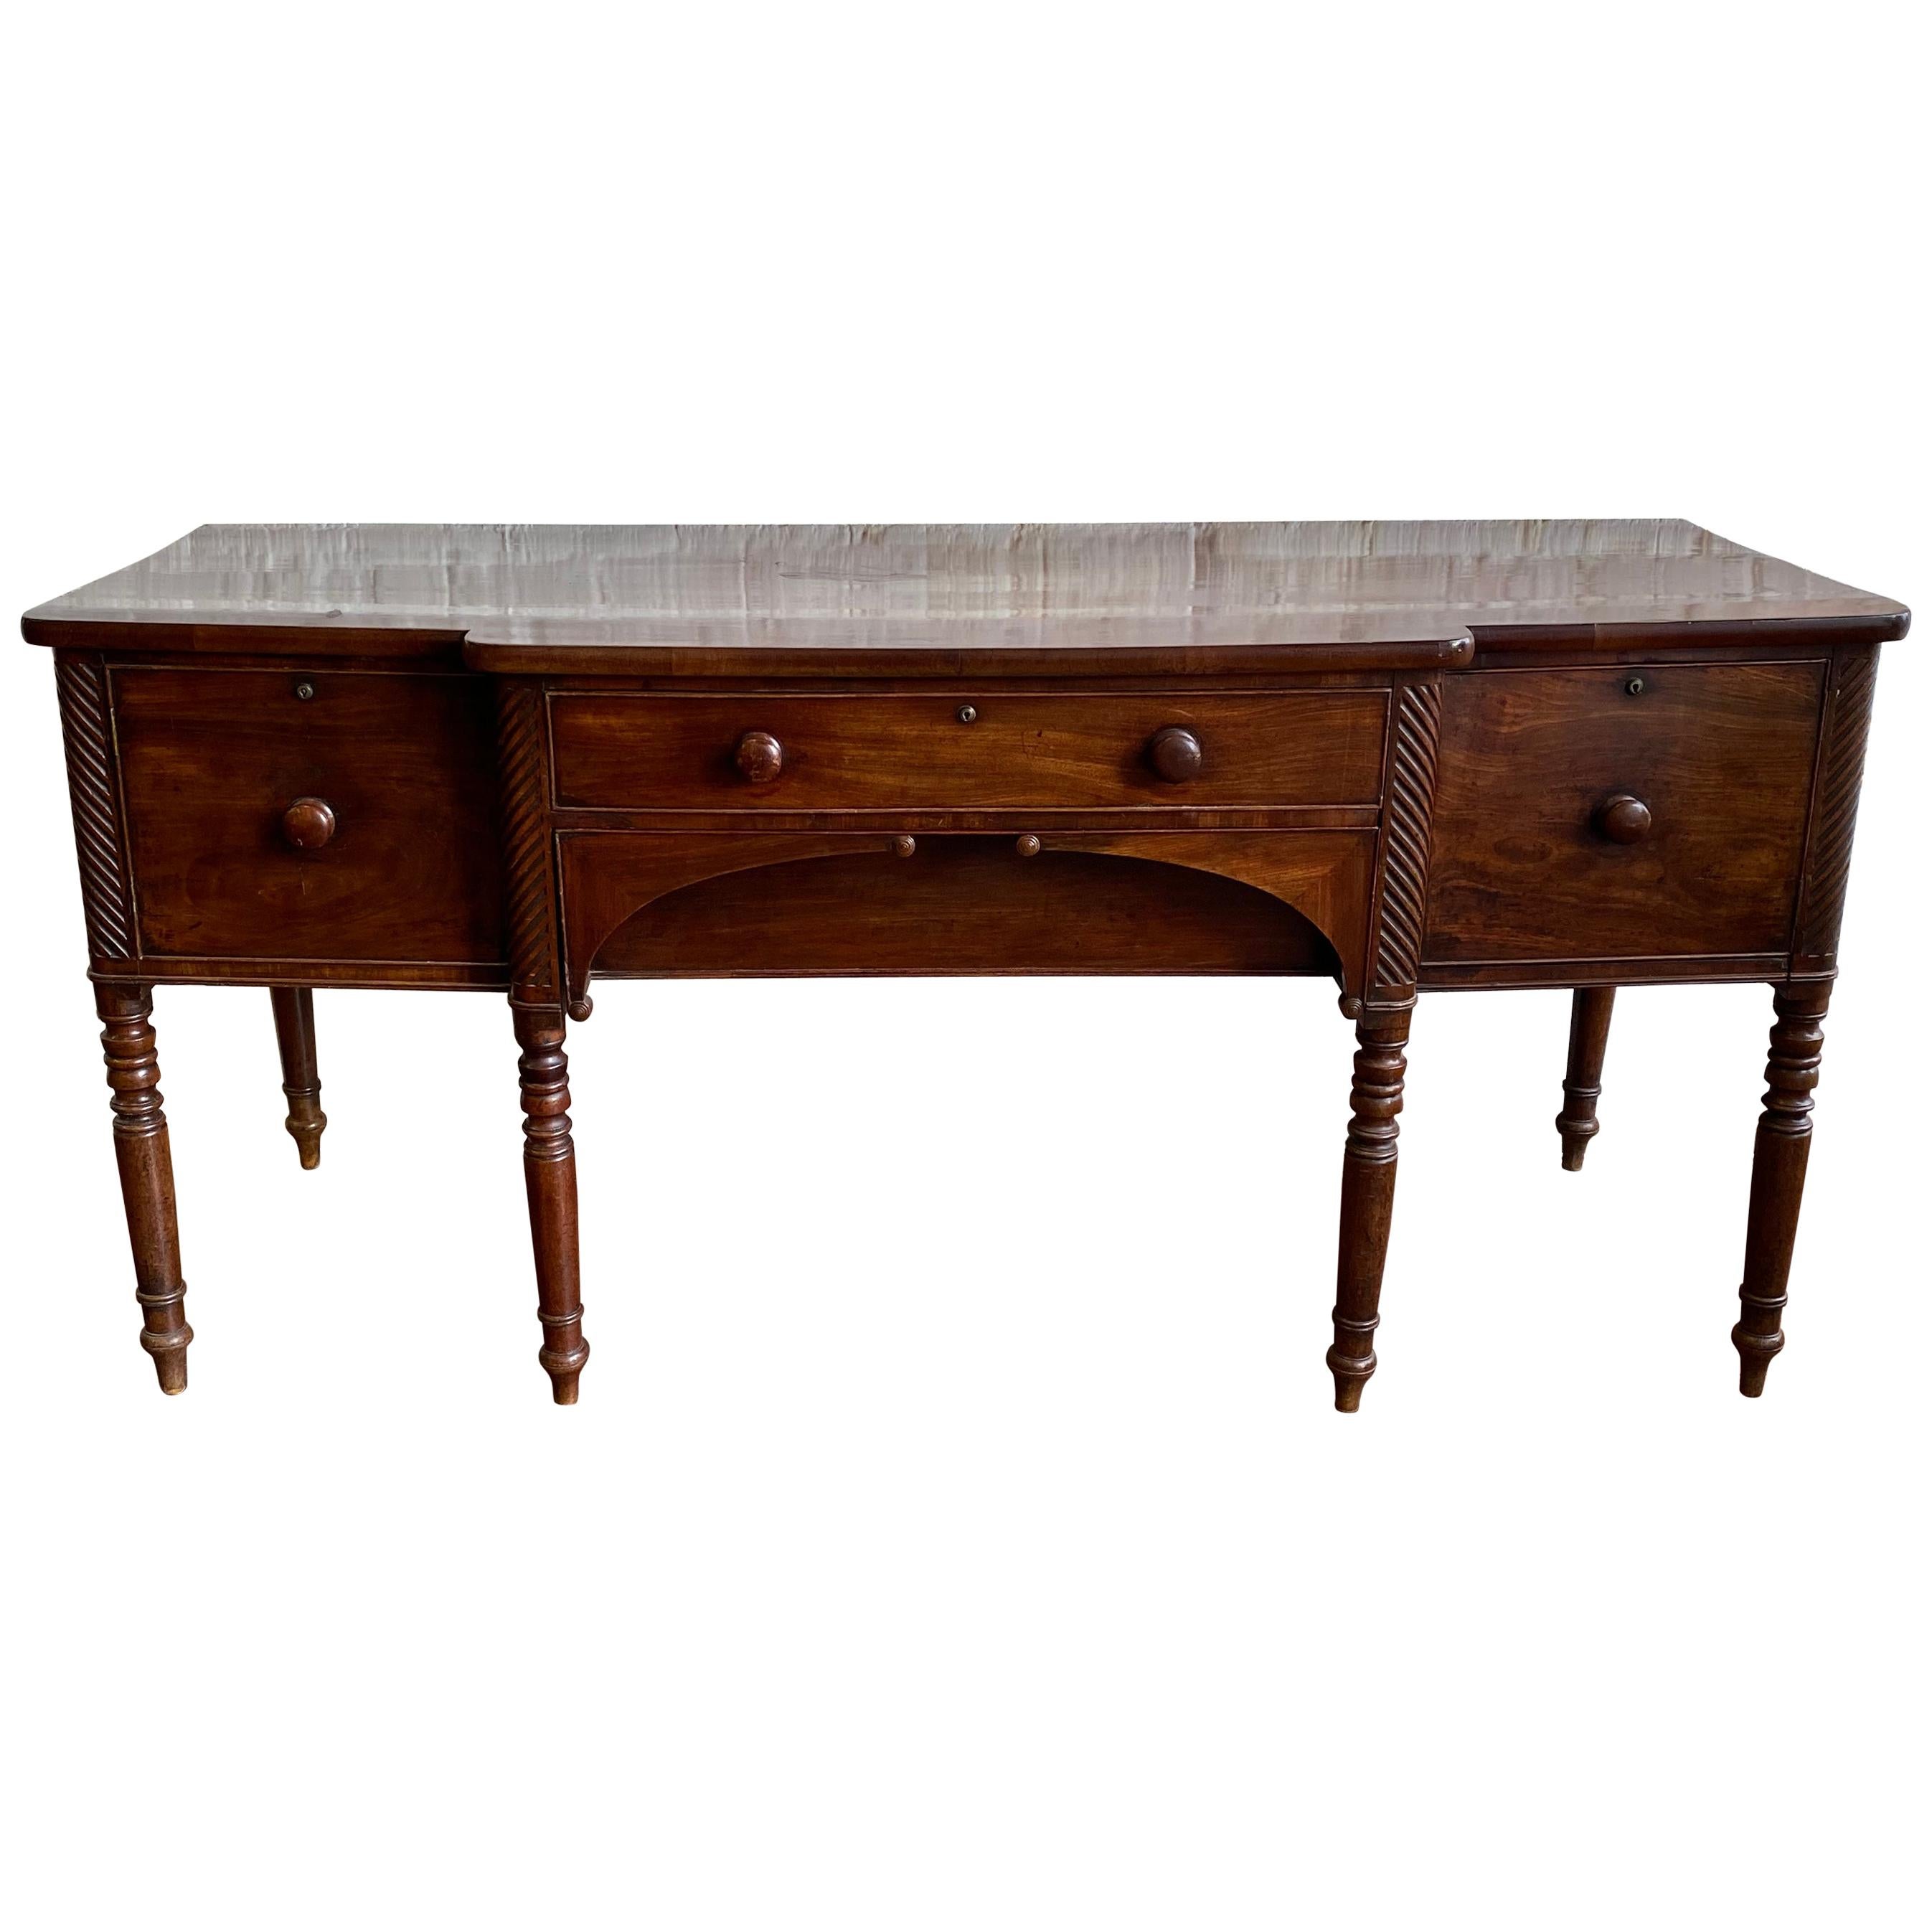 19th Century English Mahogany Breakfront Sideboard For Sale